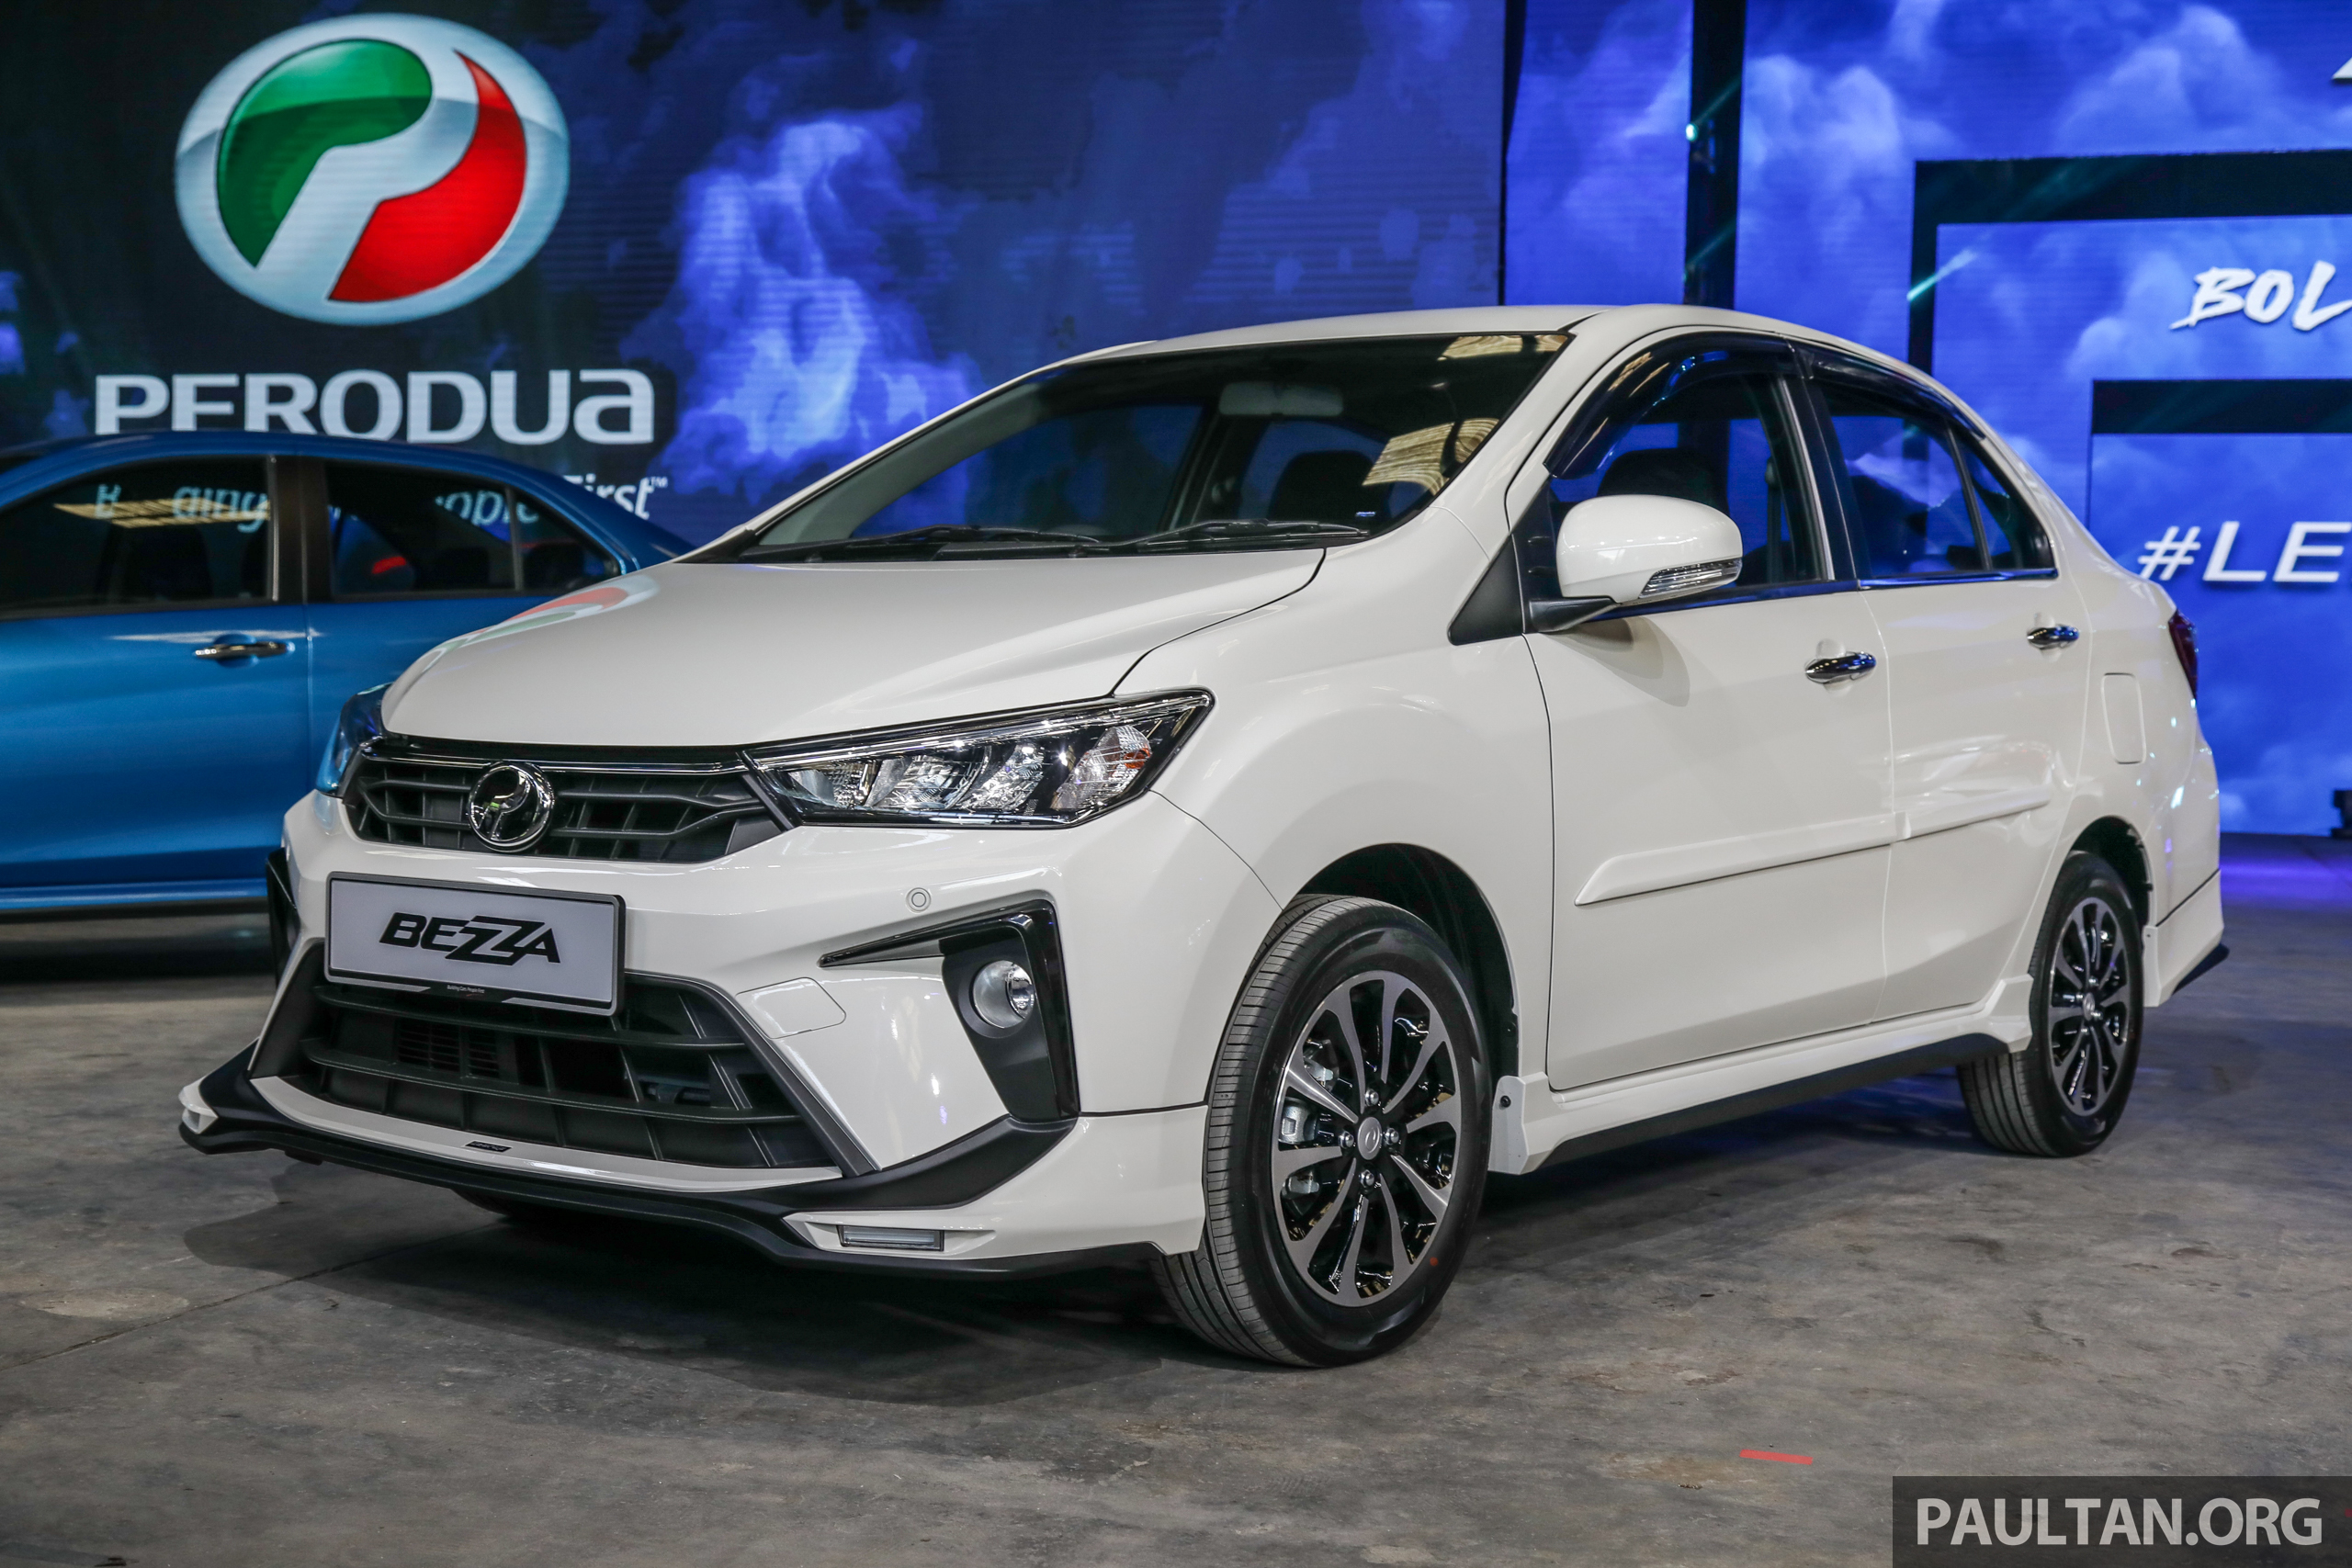 2020 Perodua Bezza Gearup Accessories Full Bodykit With Led Light Guides Seat Covers Arm Rest And More Paultan Org